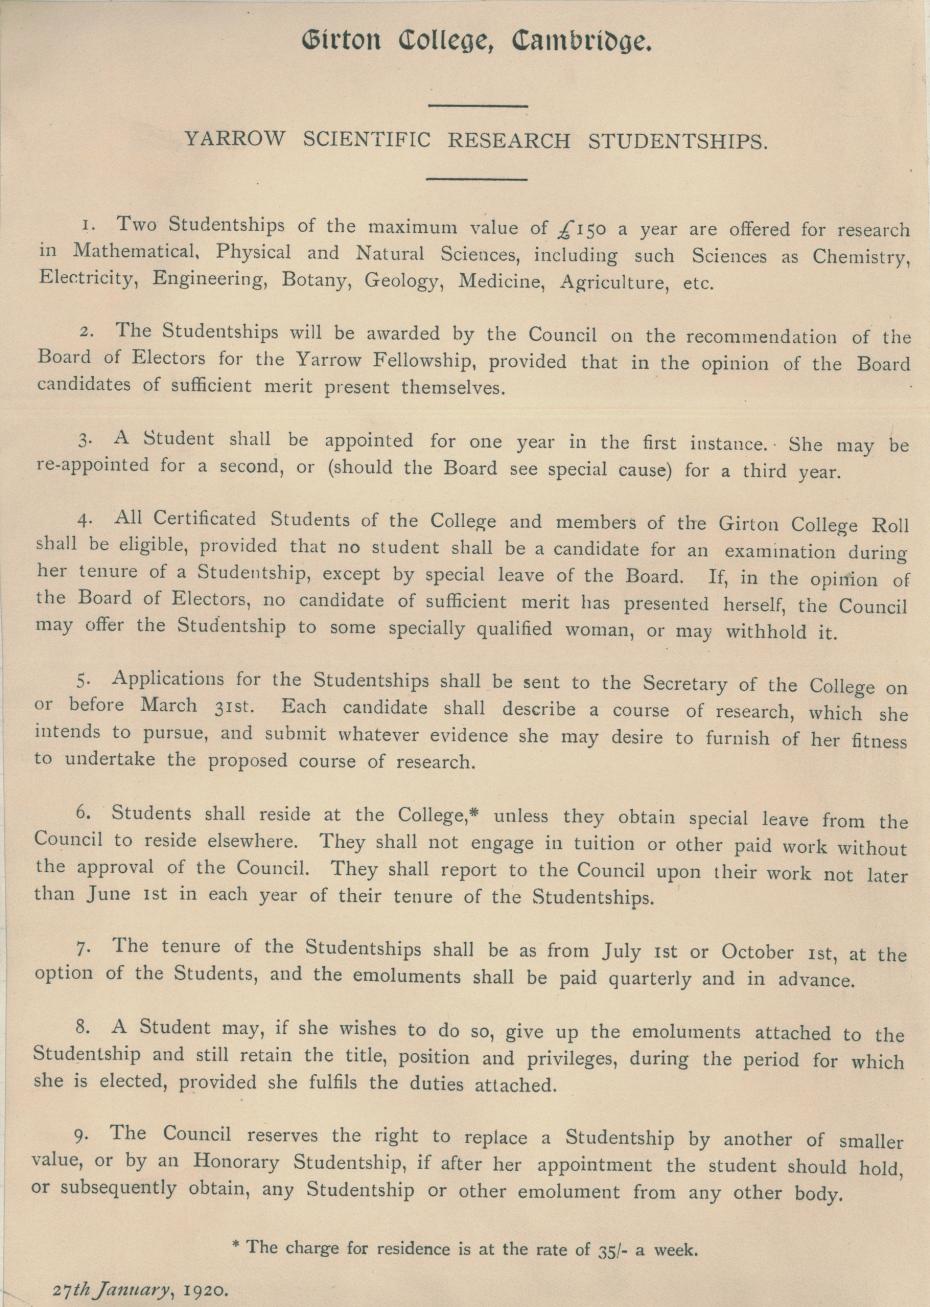 Yarrow Scientific Research Studentship, insert from the College Council minutes, 27 Jan 1920 (archive reference: GCGB 2/1/22pt)